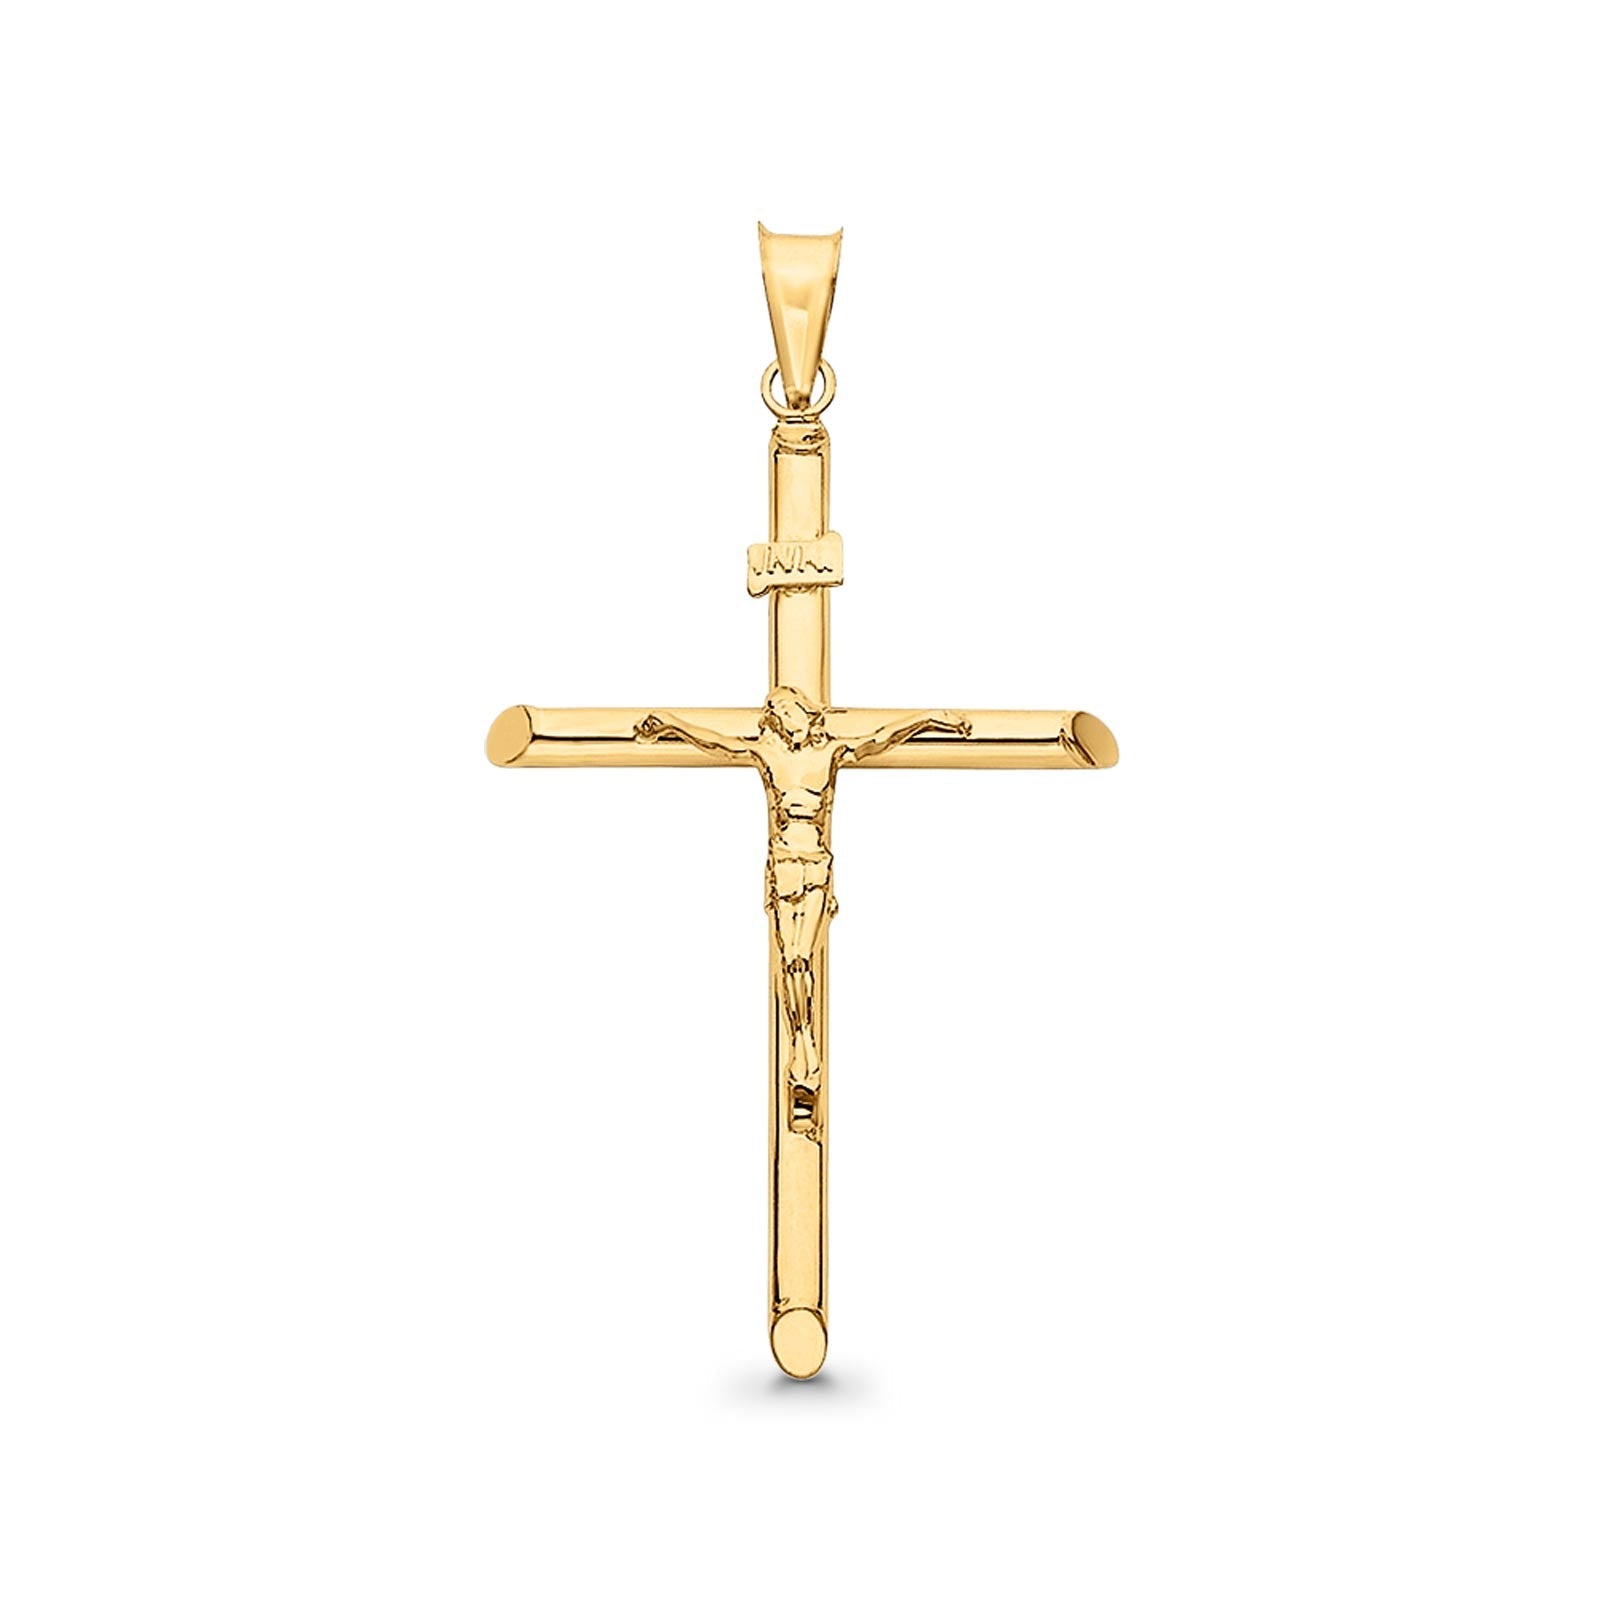 14K Yellow Gold Real Religious Crucifix Charm Pendant 1.8gm